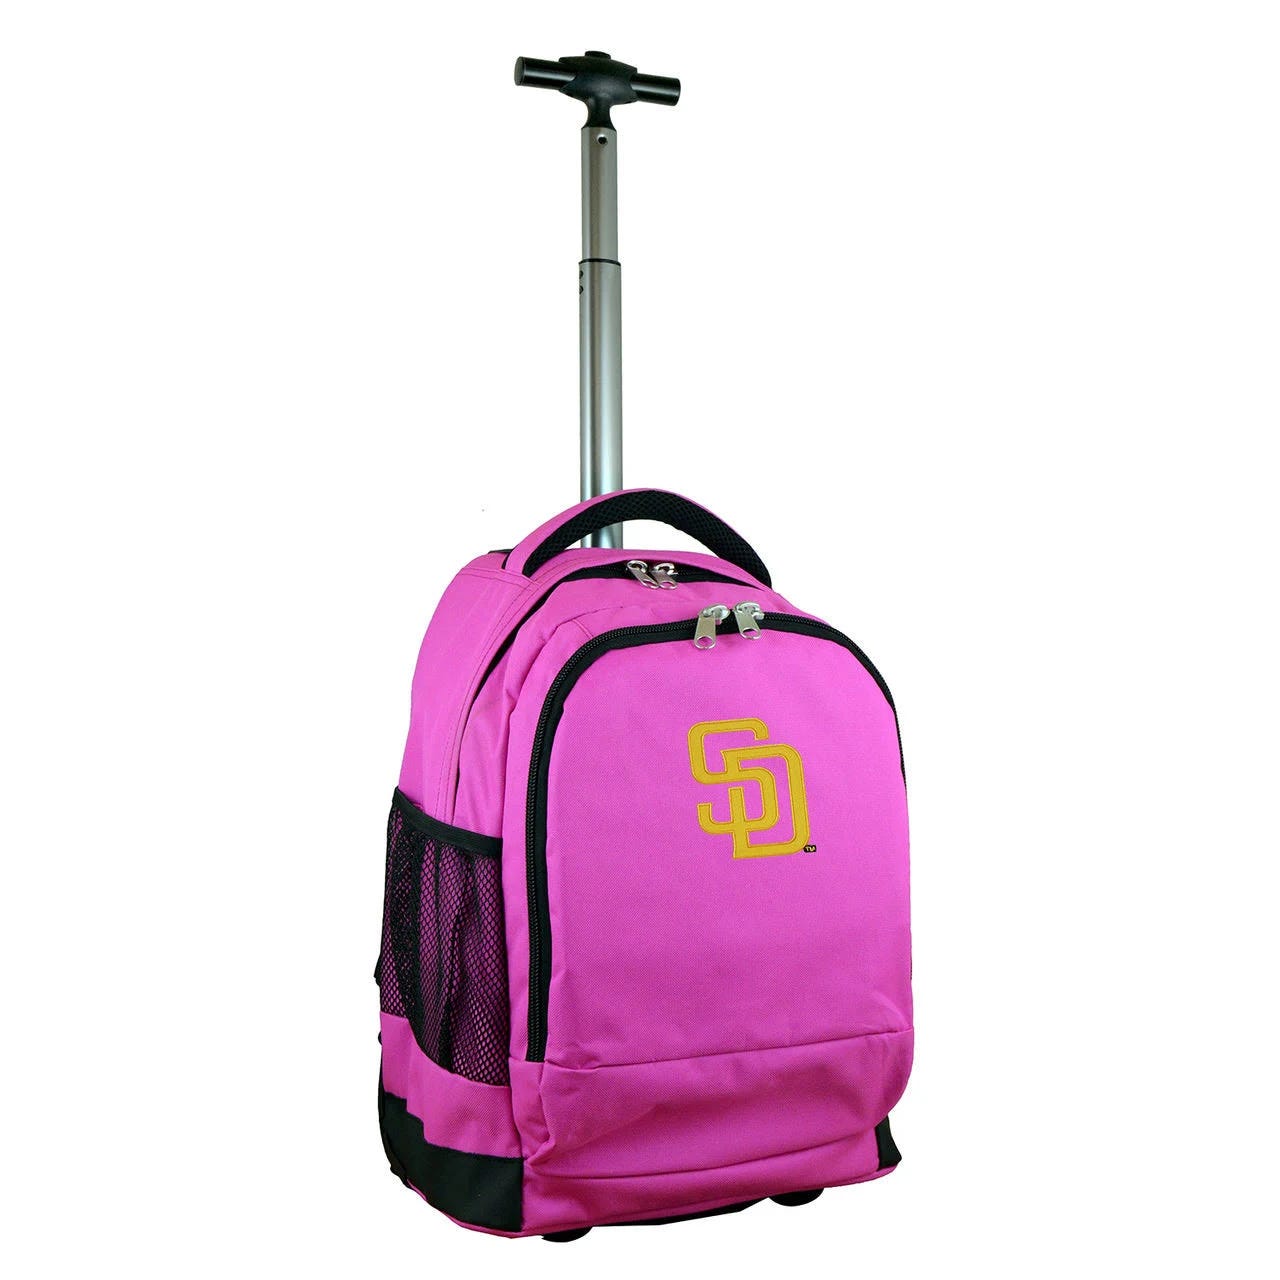 San Diego Padres Colorful Rolling Backpack | Image